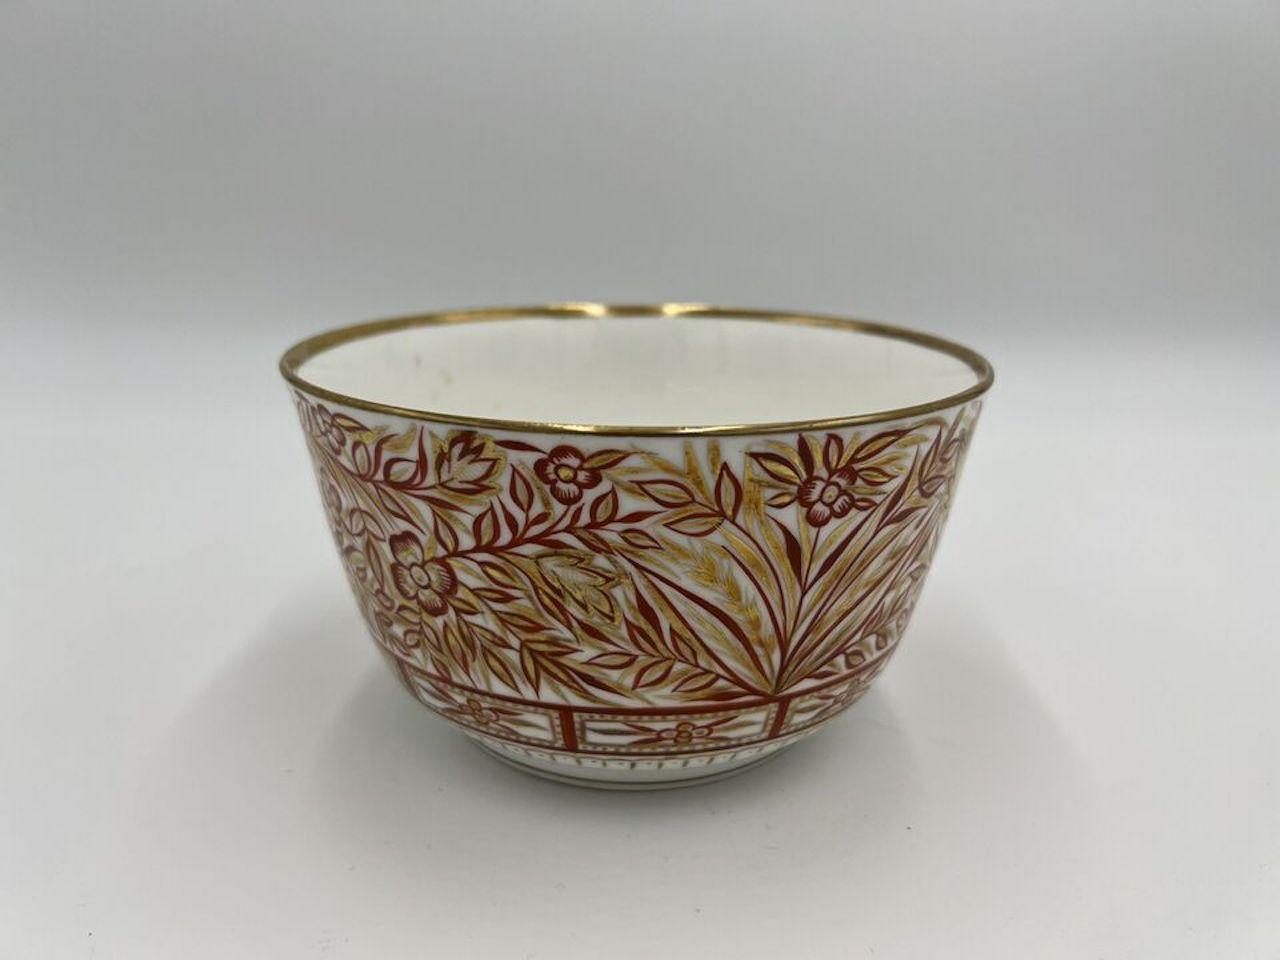 Mintons (English, 1793-2005), circa 1830. A very fine quality antique porcelain waste bowl decorated in a rust ground and heavy gilding. A large pagoda is painted to one side of the bowl and flanked by foliate baskets and vines. A gilt starburst to